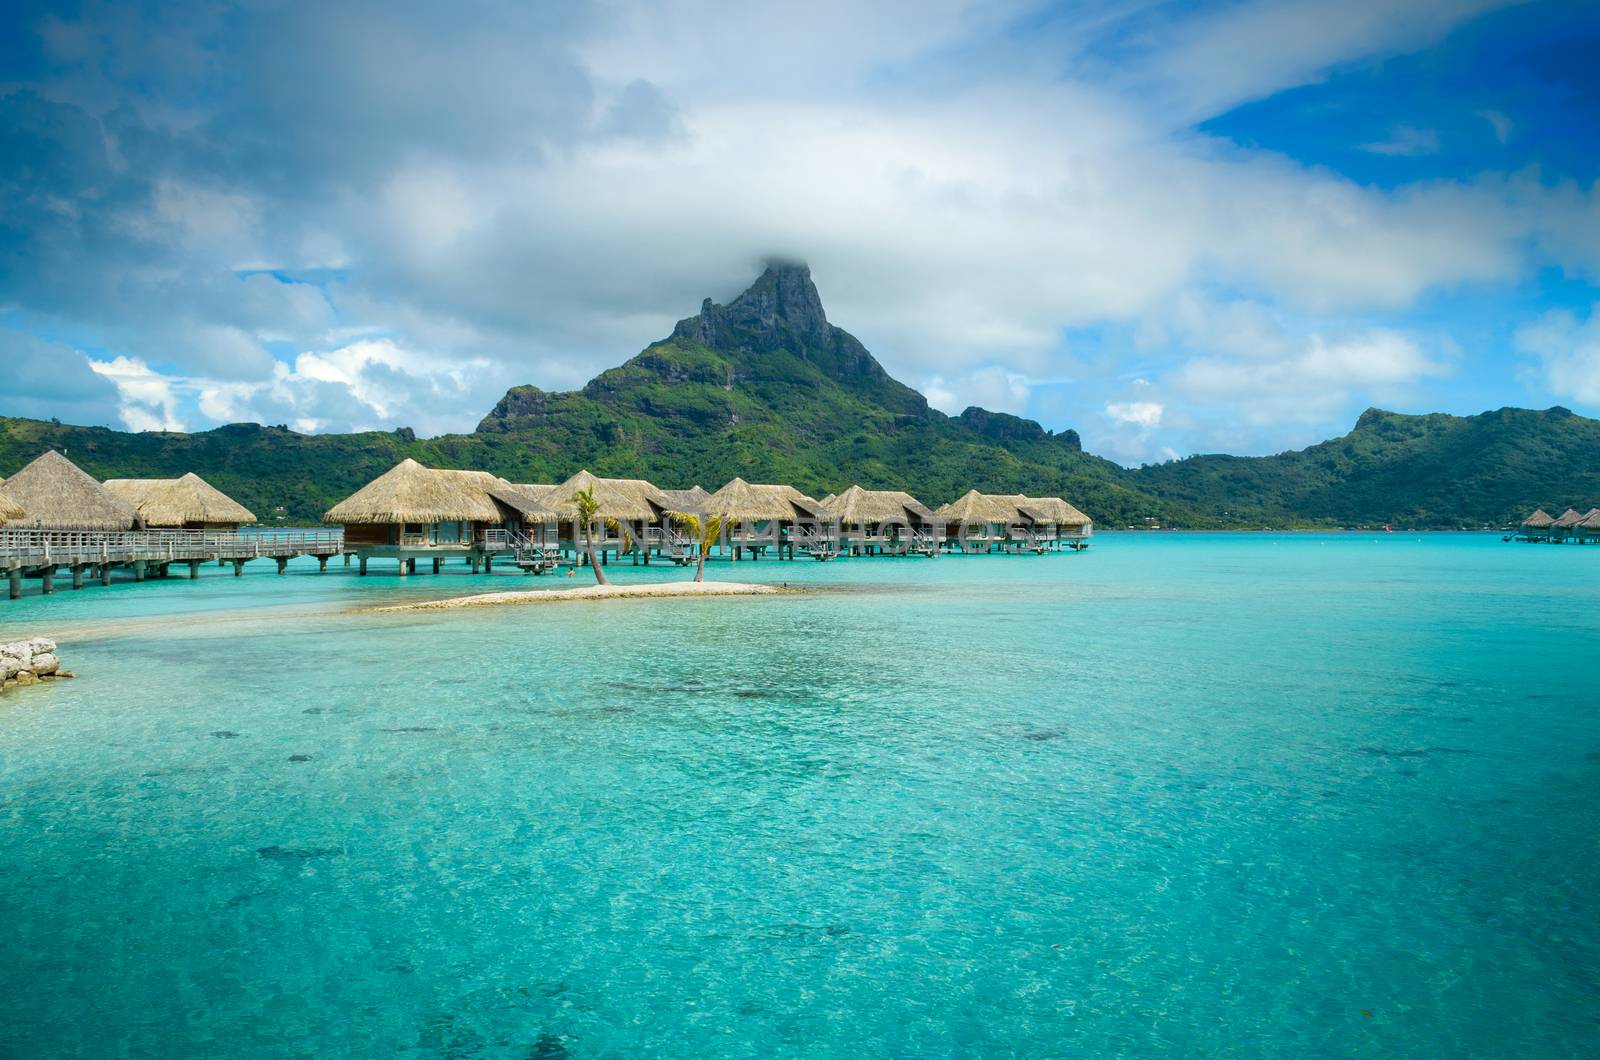 Luxury thatched roof bungalow resort on Bora Bora by pljvv